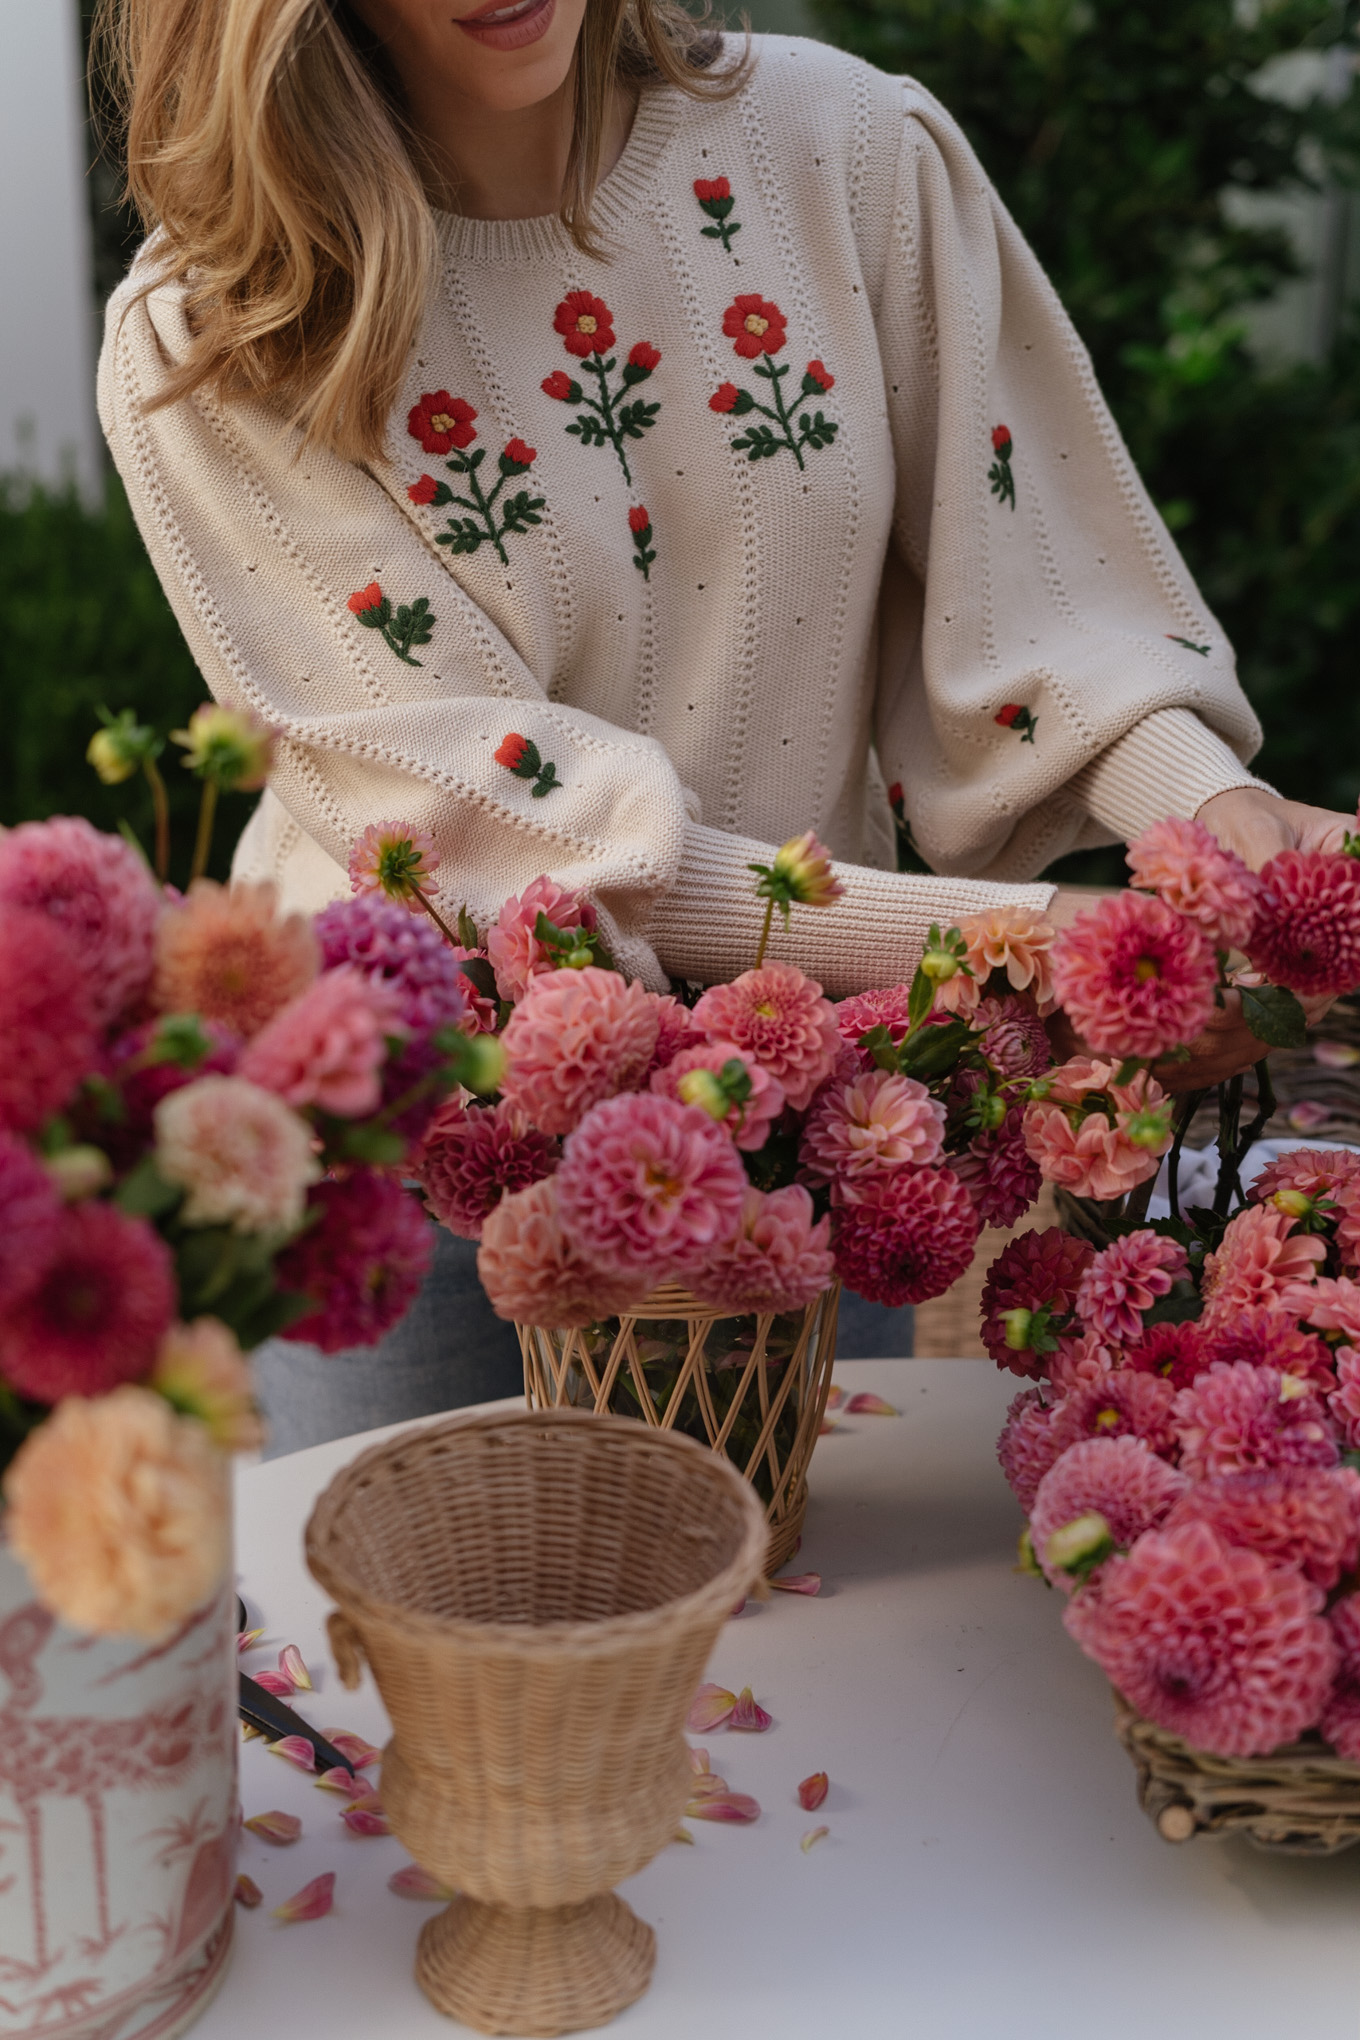 floral knit cream sweater pink dahlias